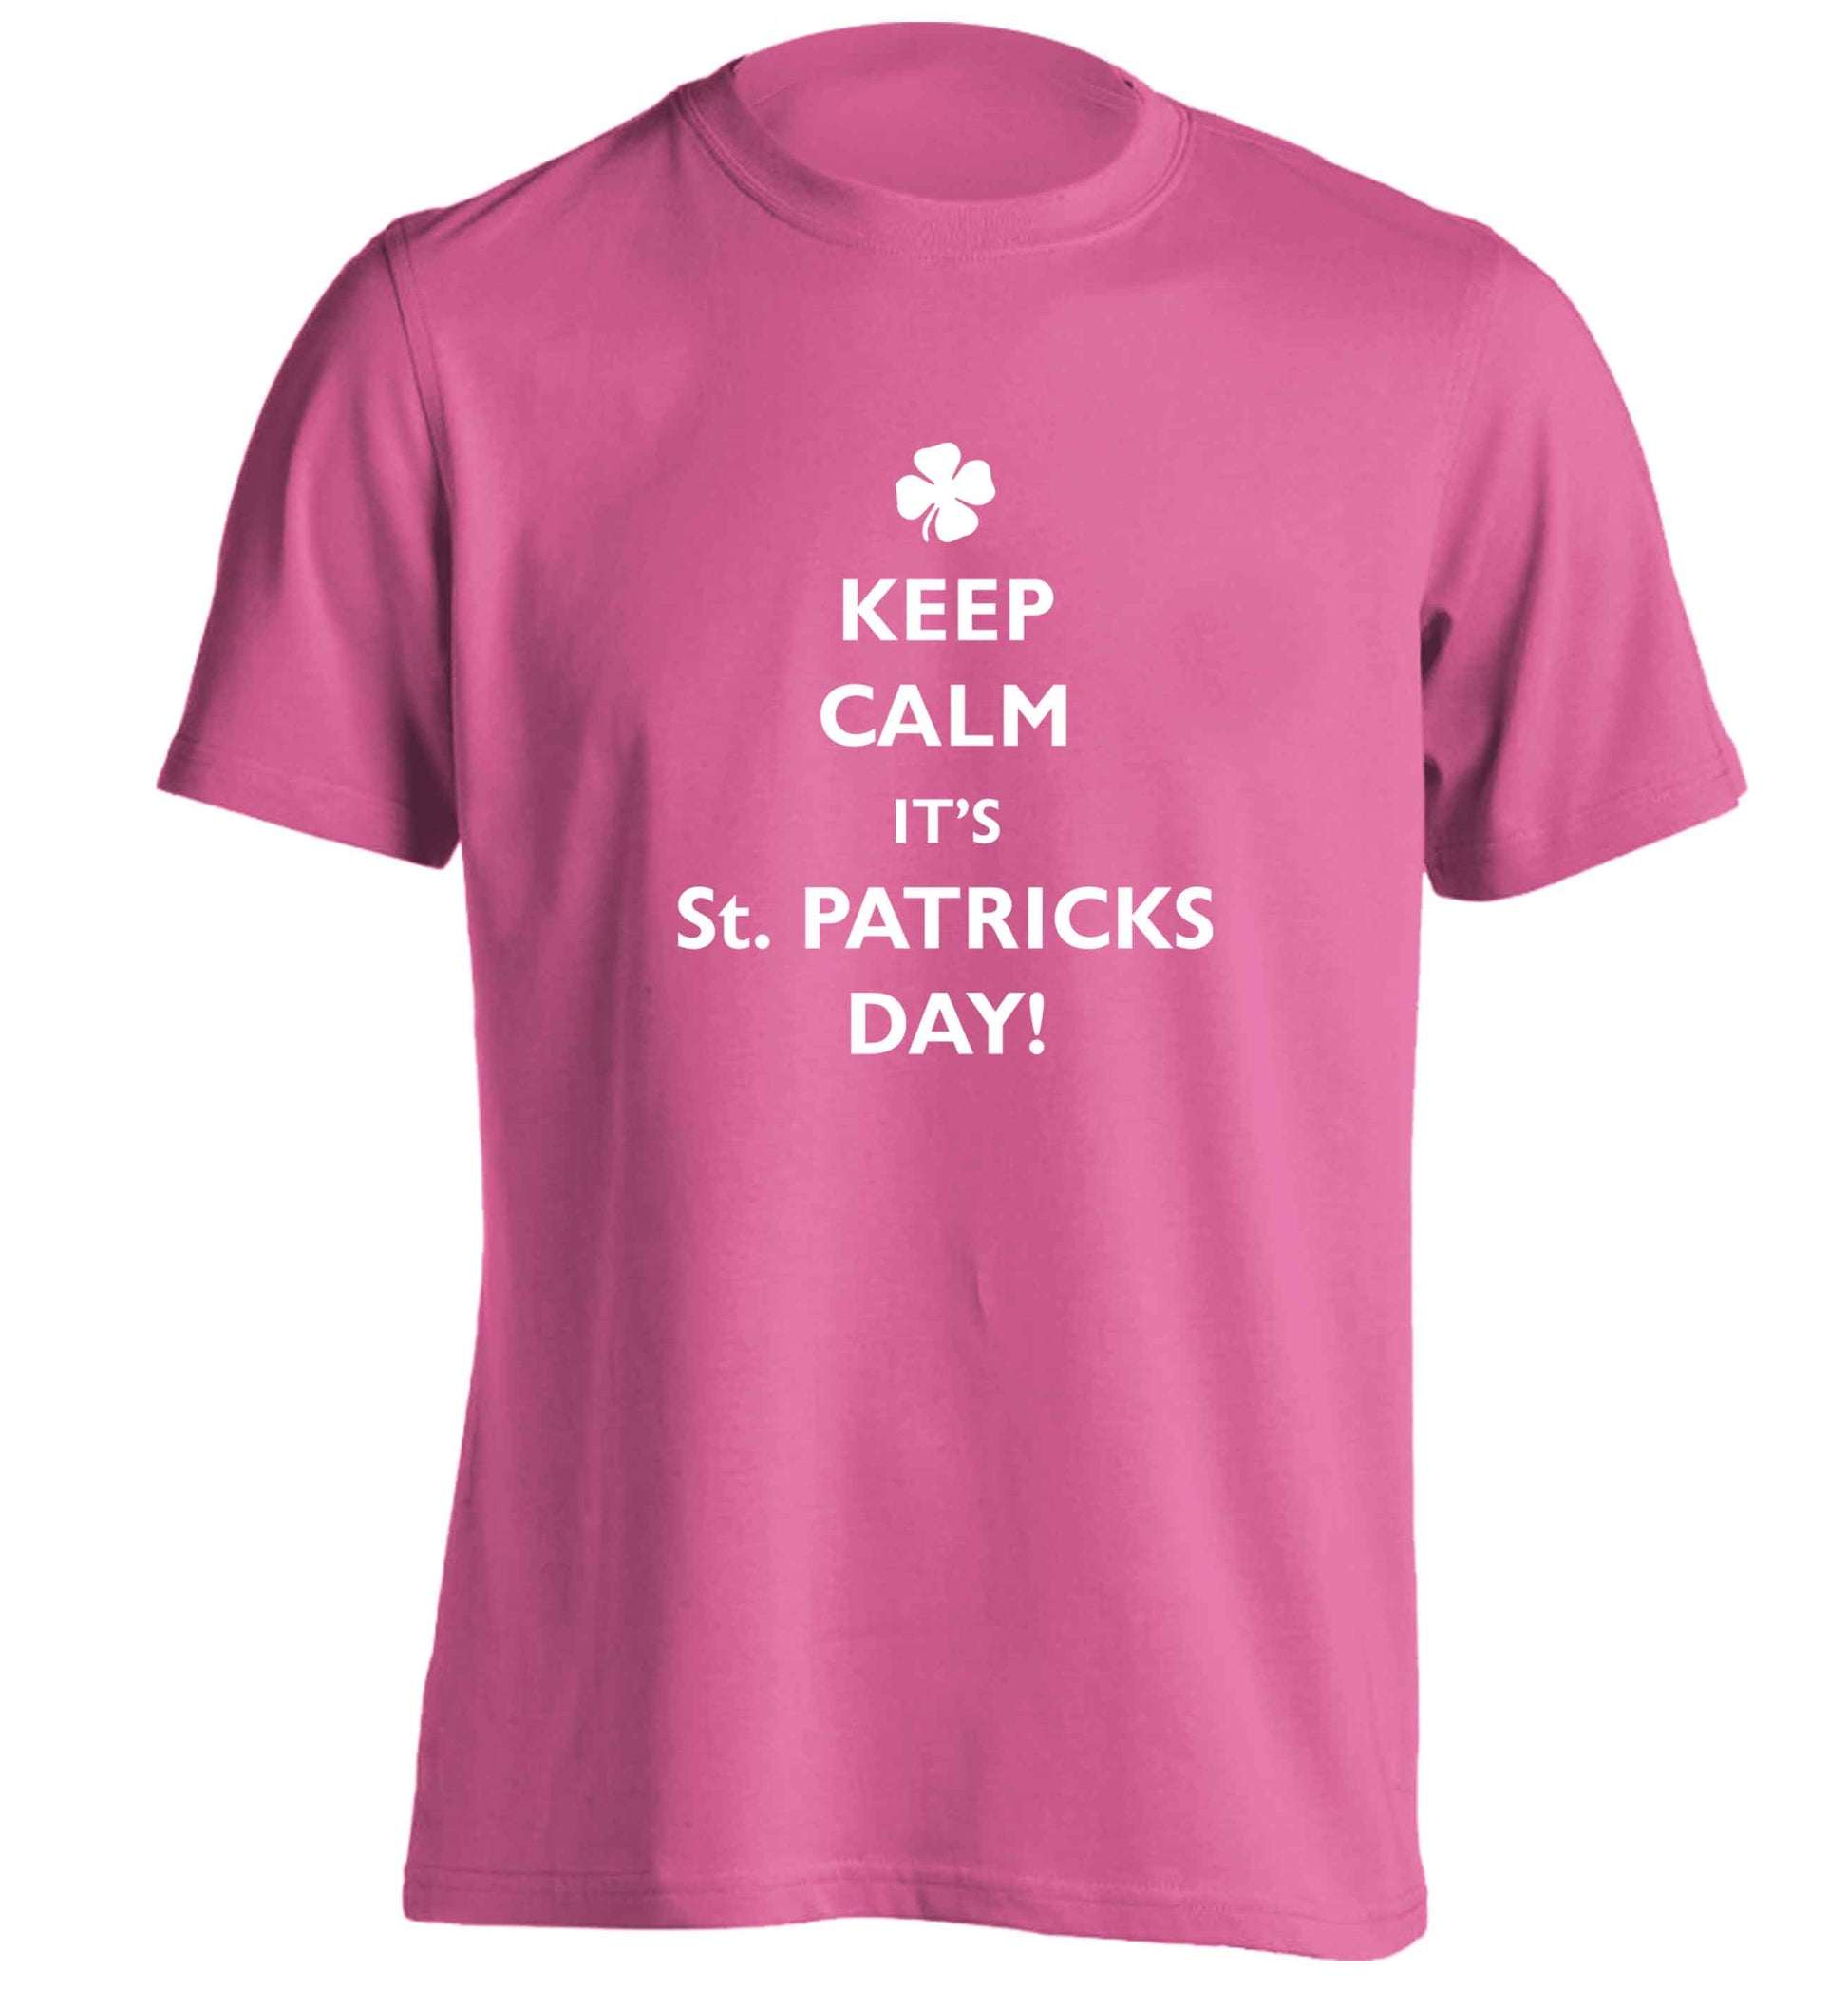 I can't keep calm it's St.Patricks day adults unisex pink Tshirt 2XL